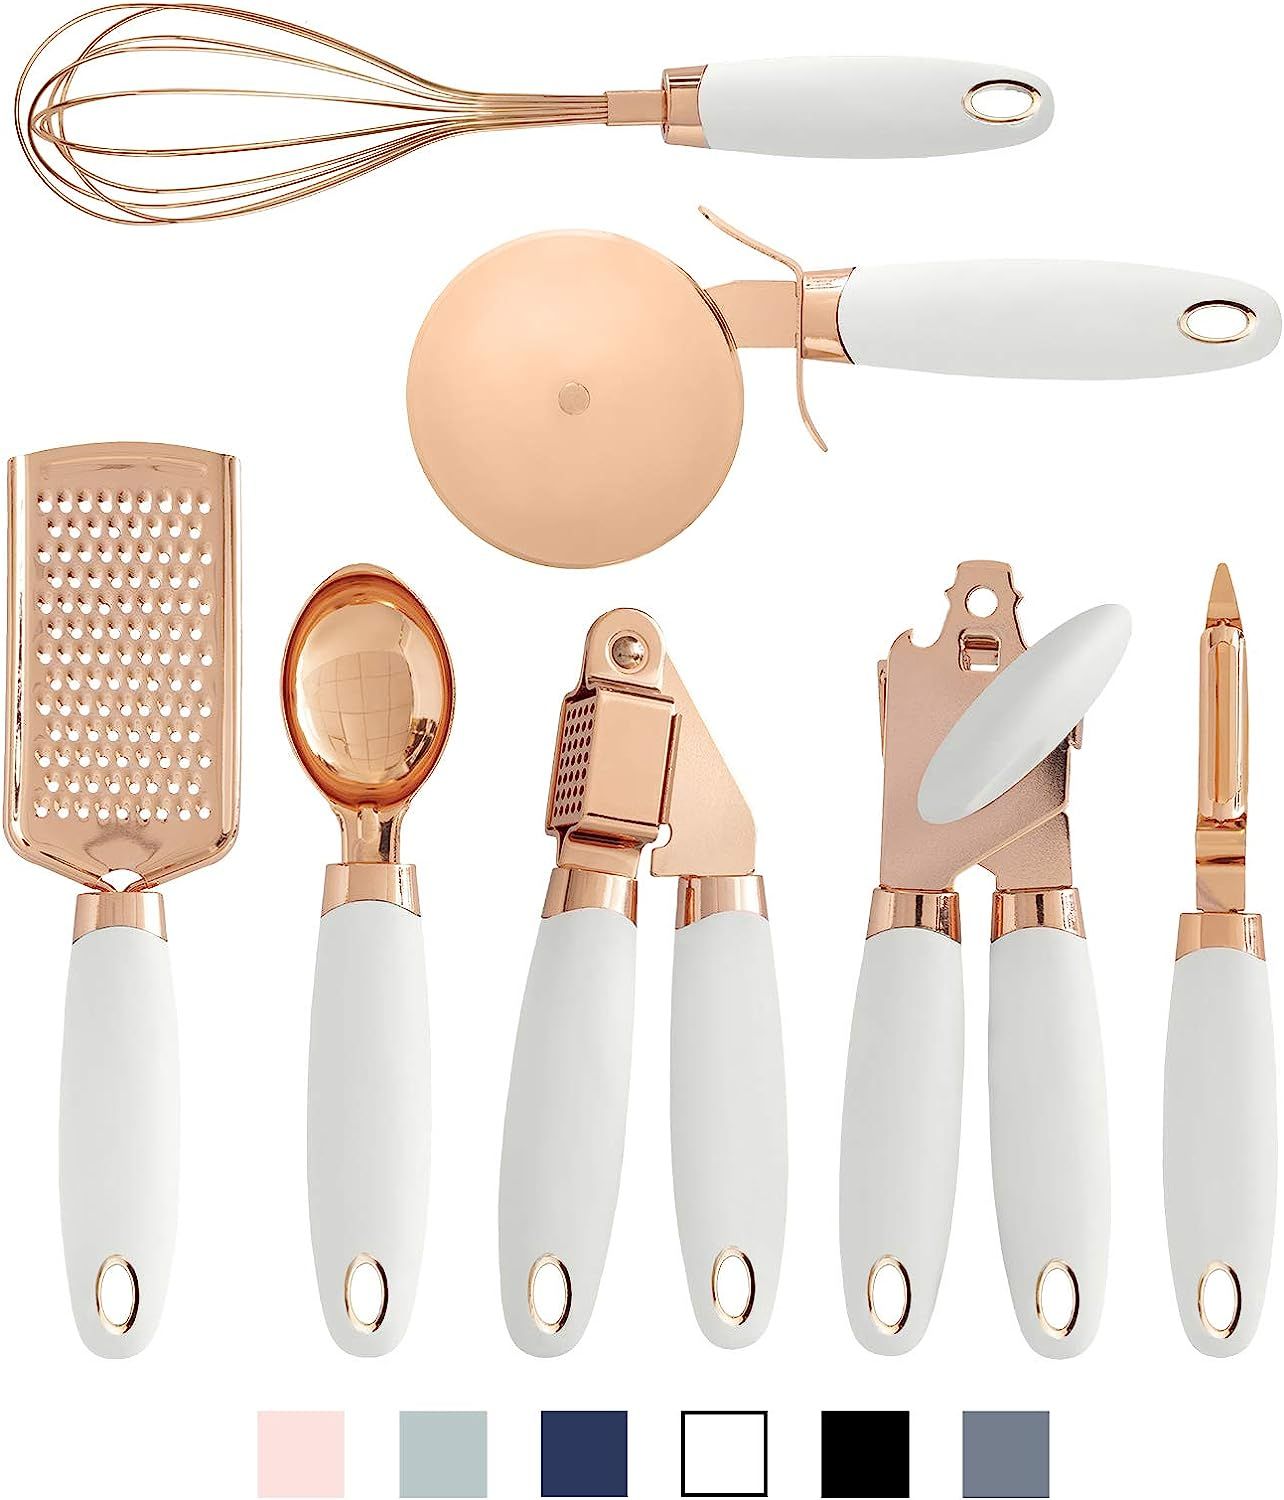 COOK With COLOR 7 Pc Kitchen Gadget Set Copper Coated Stainless Steel Utensils with Soft Touch White | Amazon (US)